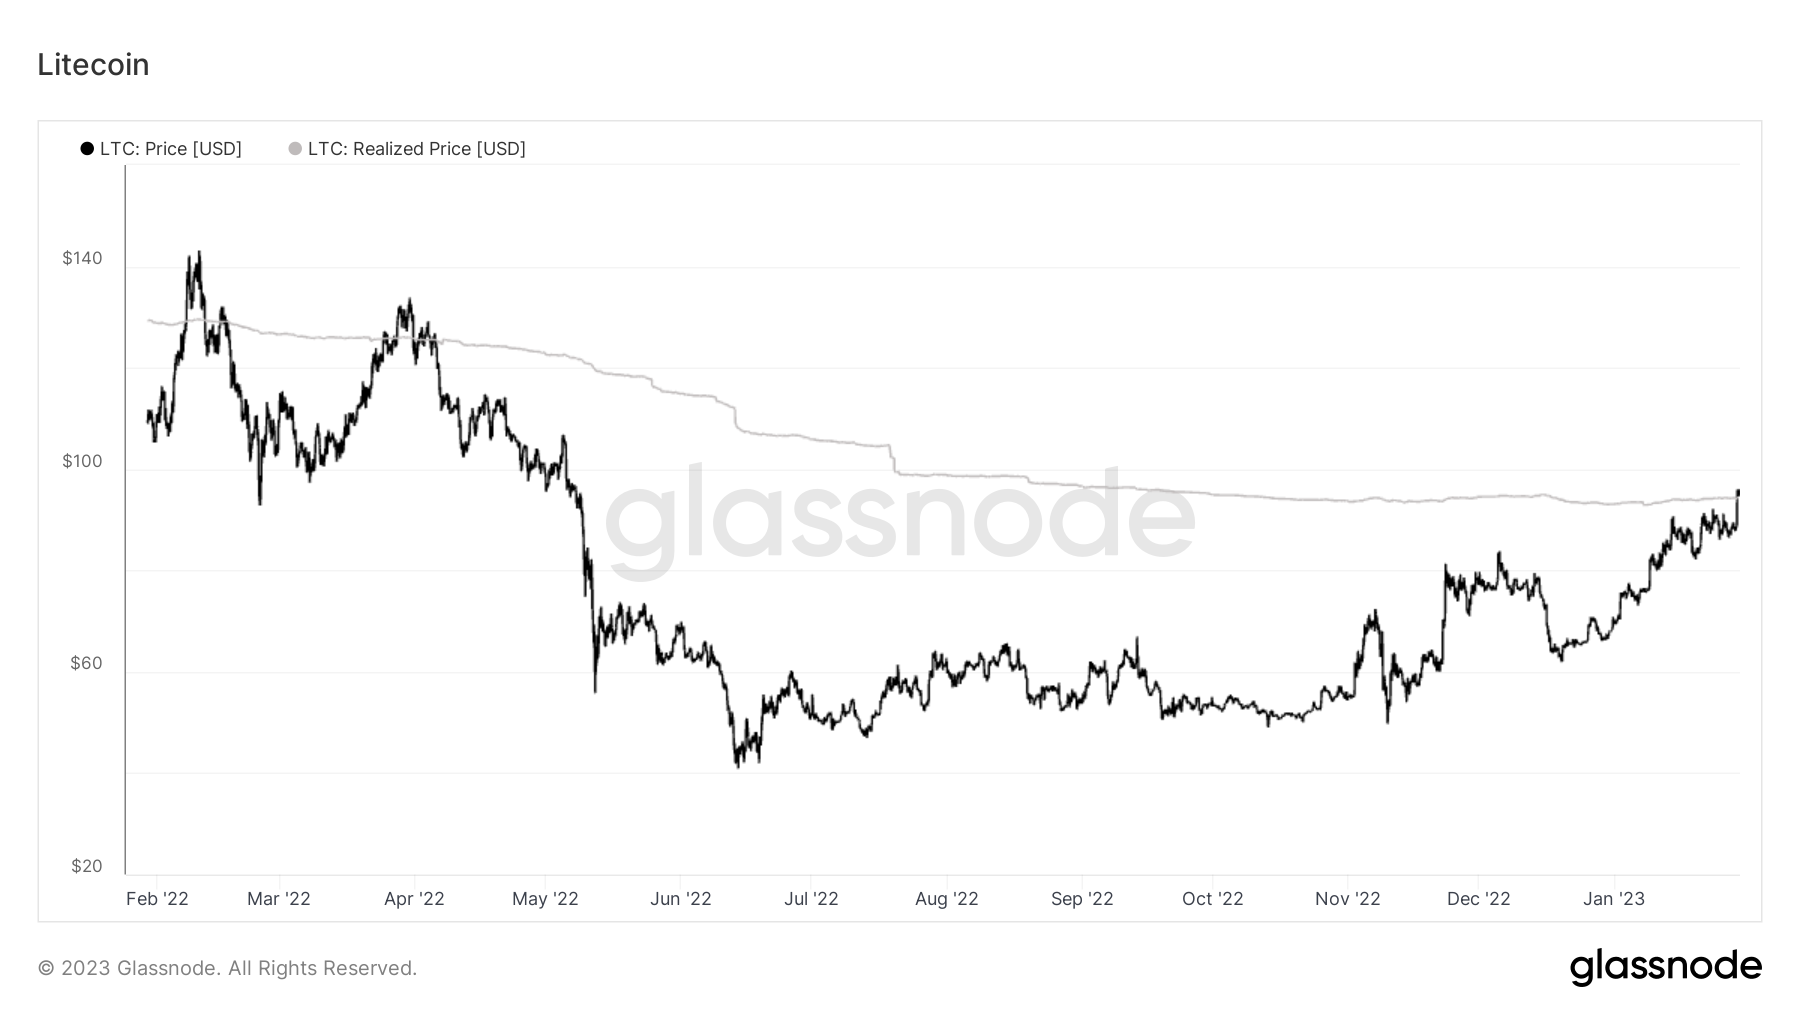 Realized Price: (Source: Glassnode)